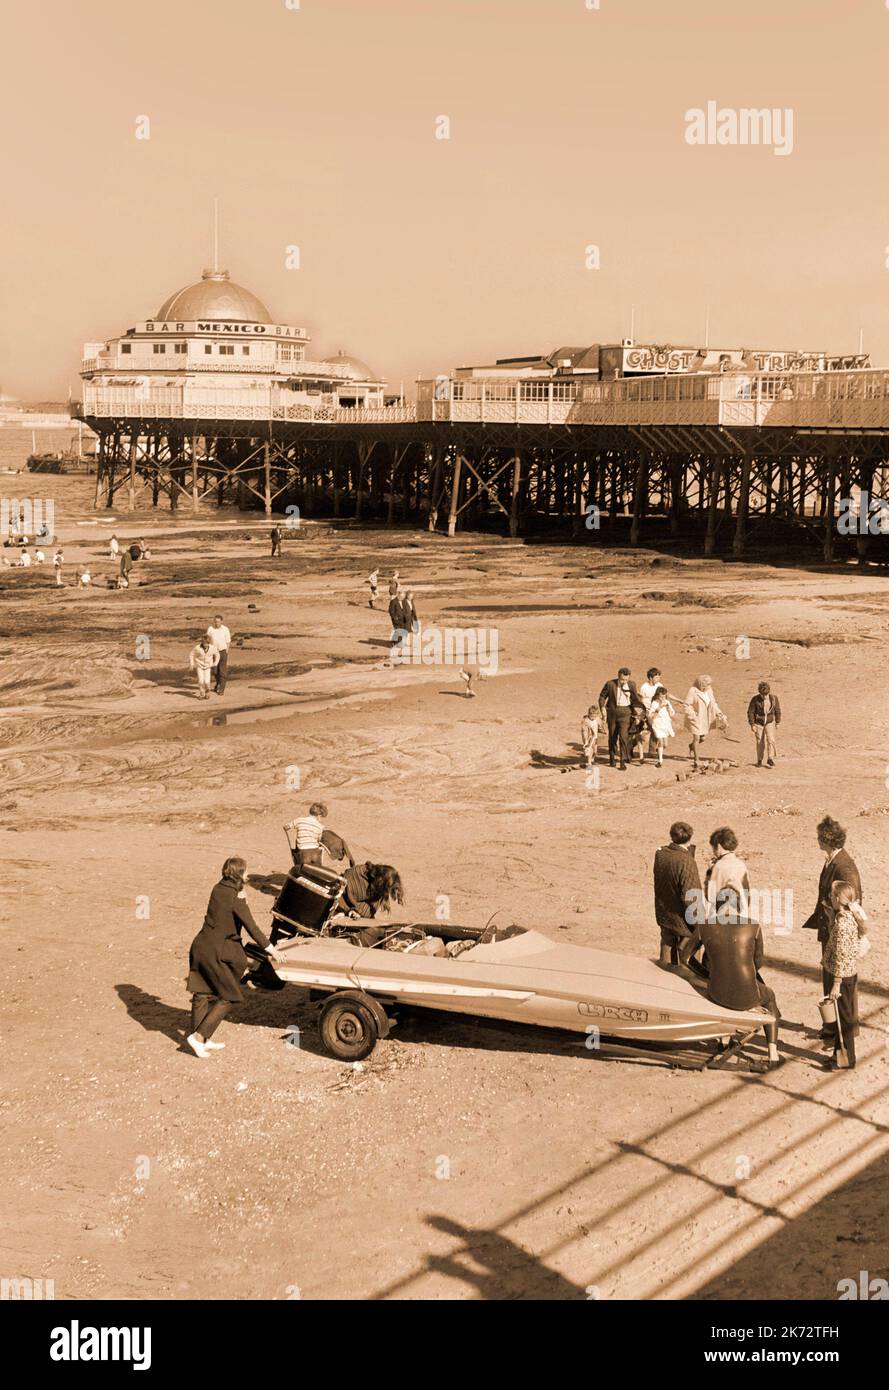 Vintage New Brighton, 1970, seaside resort, the famous pier with Mexico bar and ghost train, tourists enjoying the beach. Wallasey, Merseyside Stock Photo